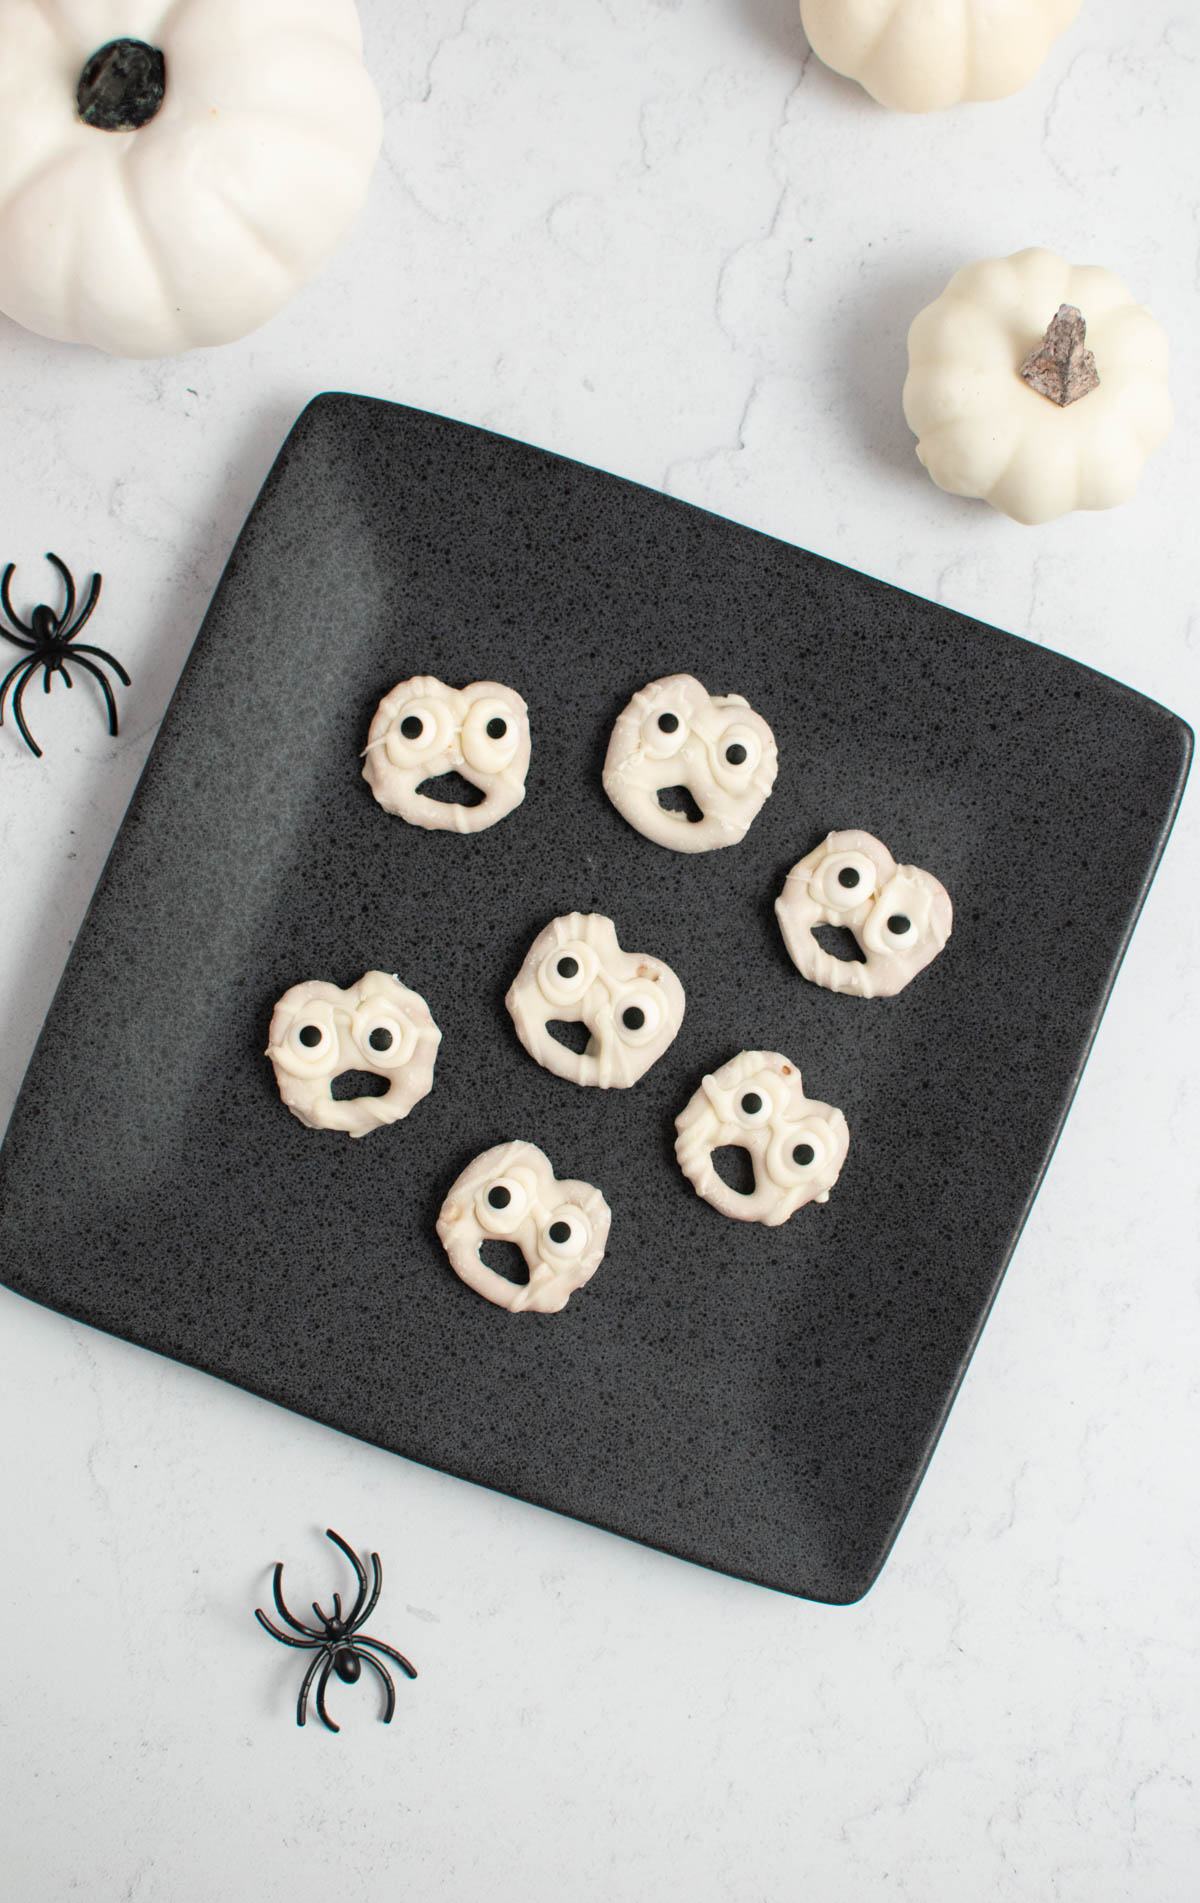 Seven white chocolate ghost pretzels on gray square plate with plastic spiders and white pumpkins nearby.